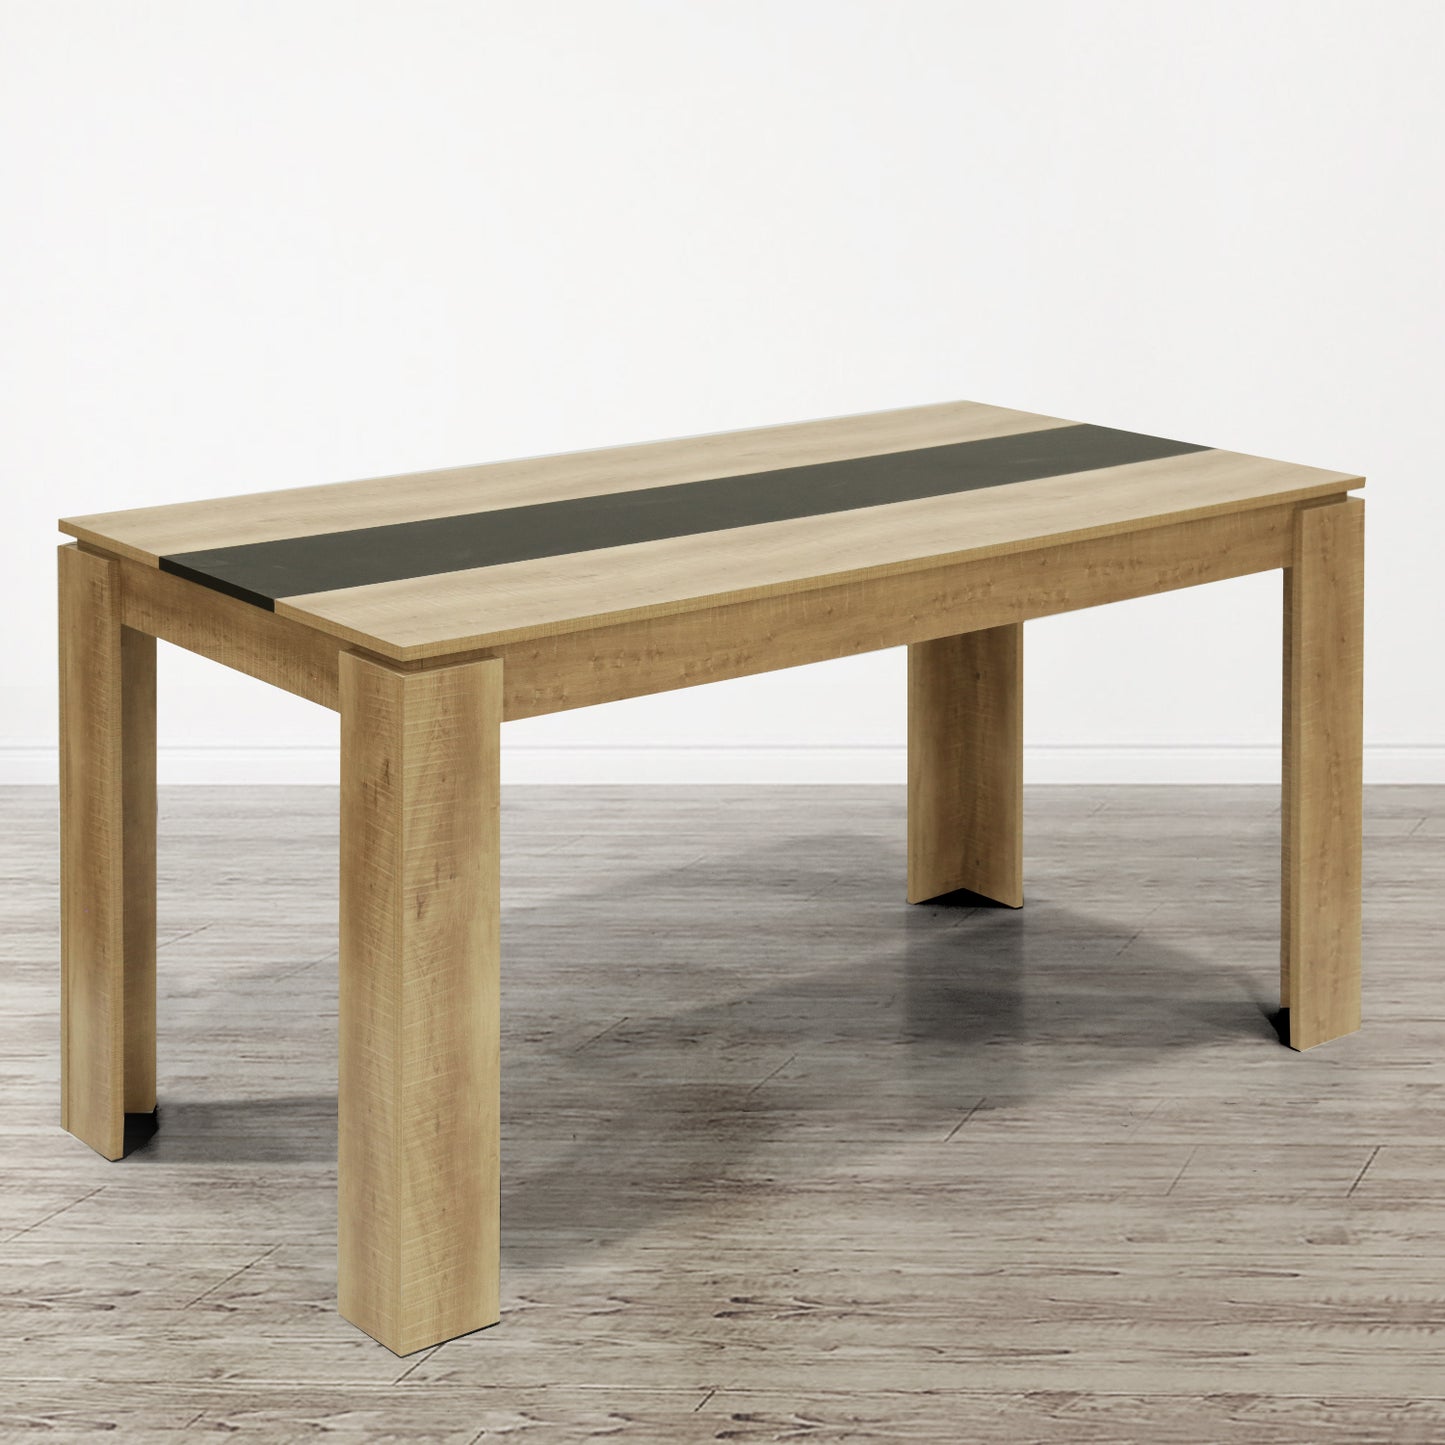 MUSK Dining Table with 140cm - Black